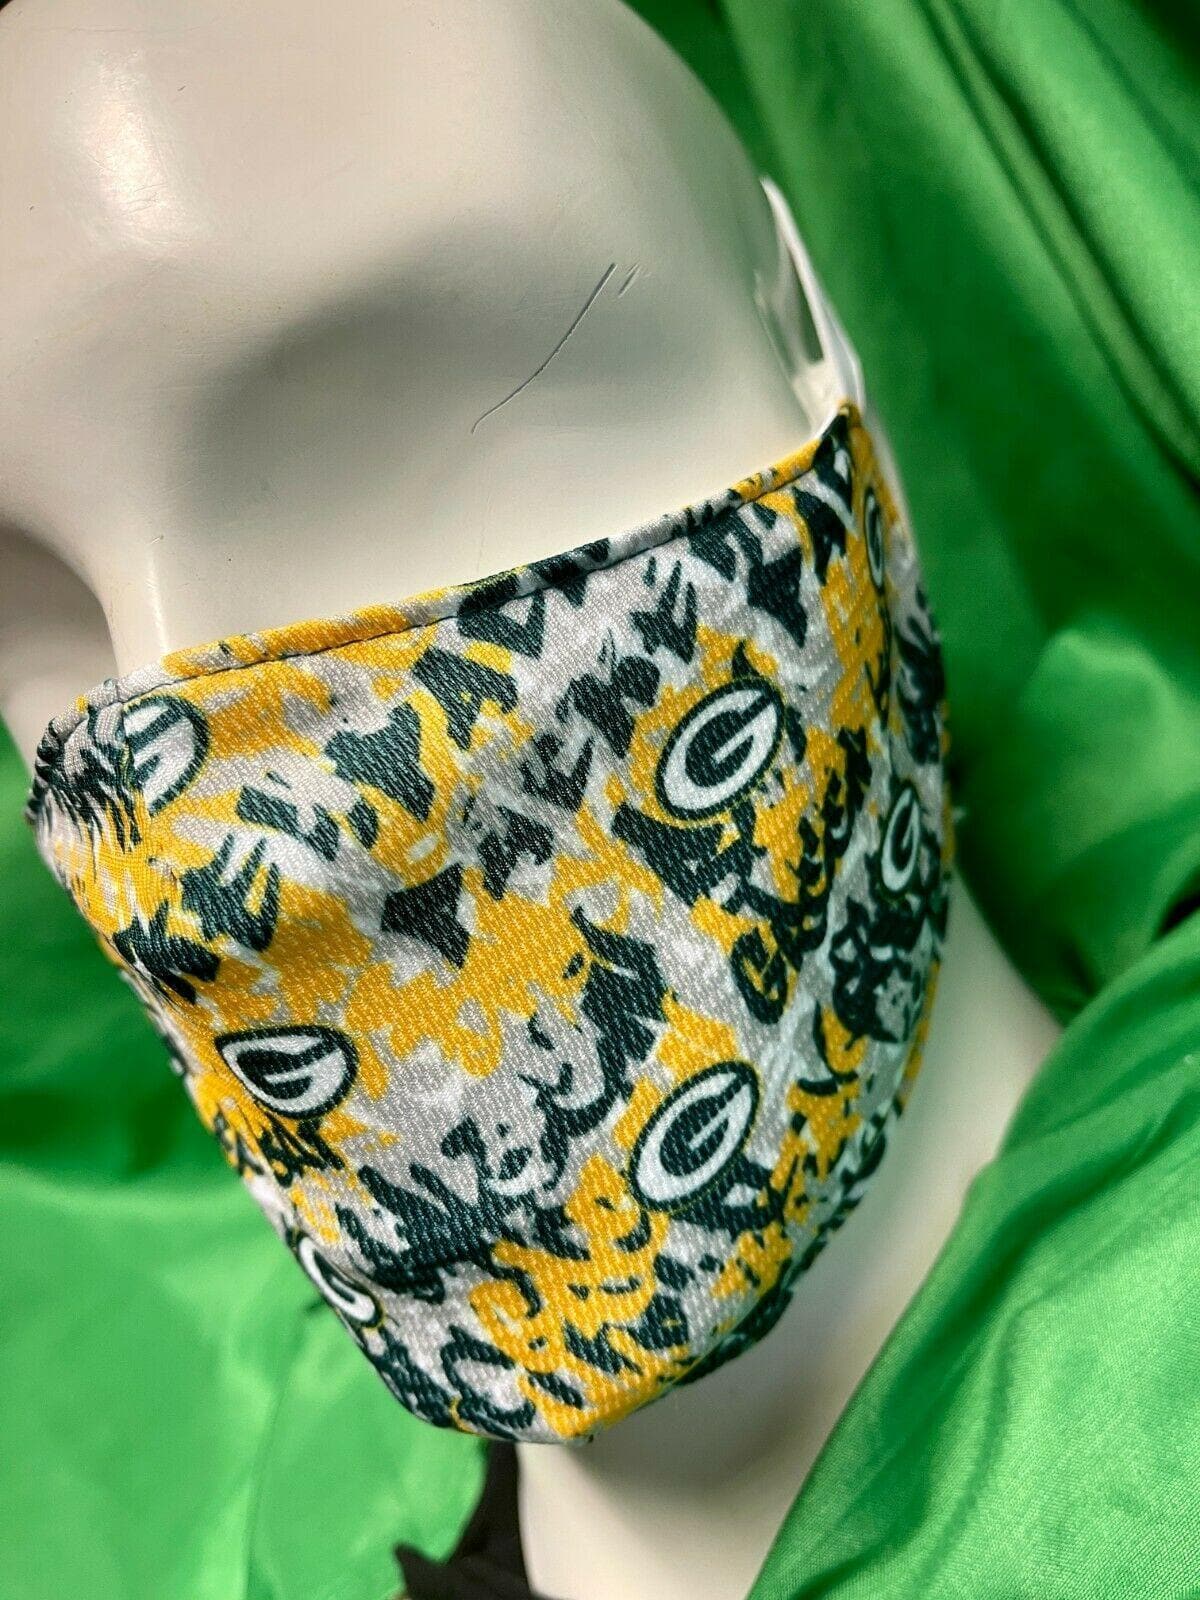 NFL Green Bay Packers Face Cover Mask Twin Elastic Around Head NWT